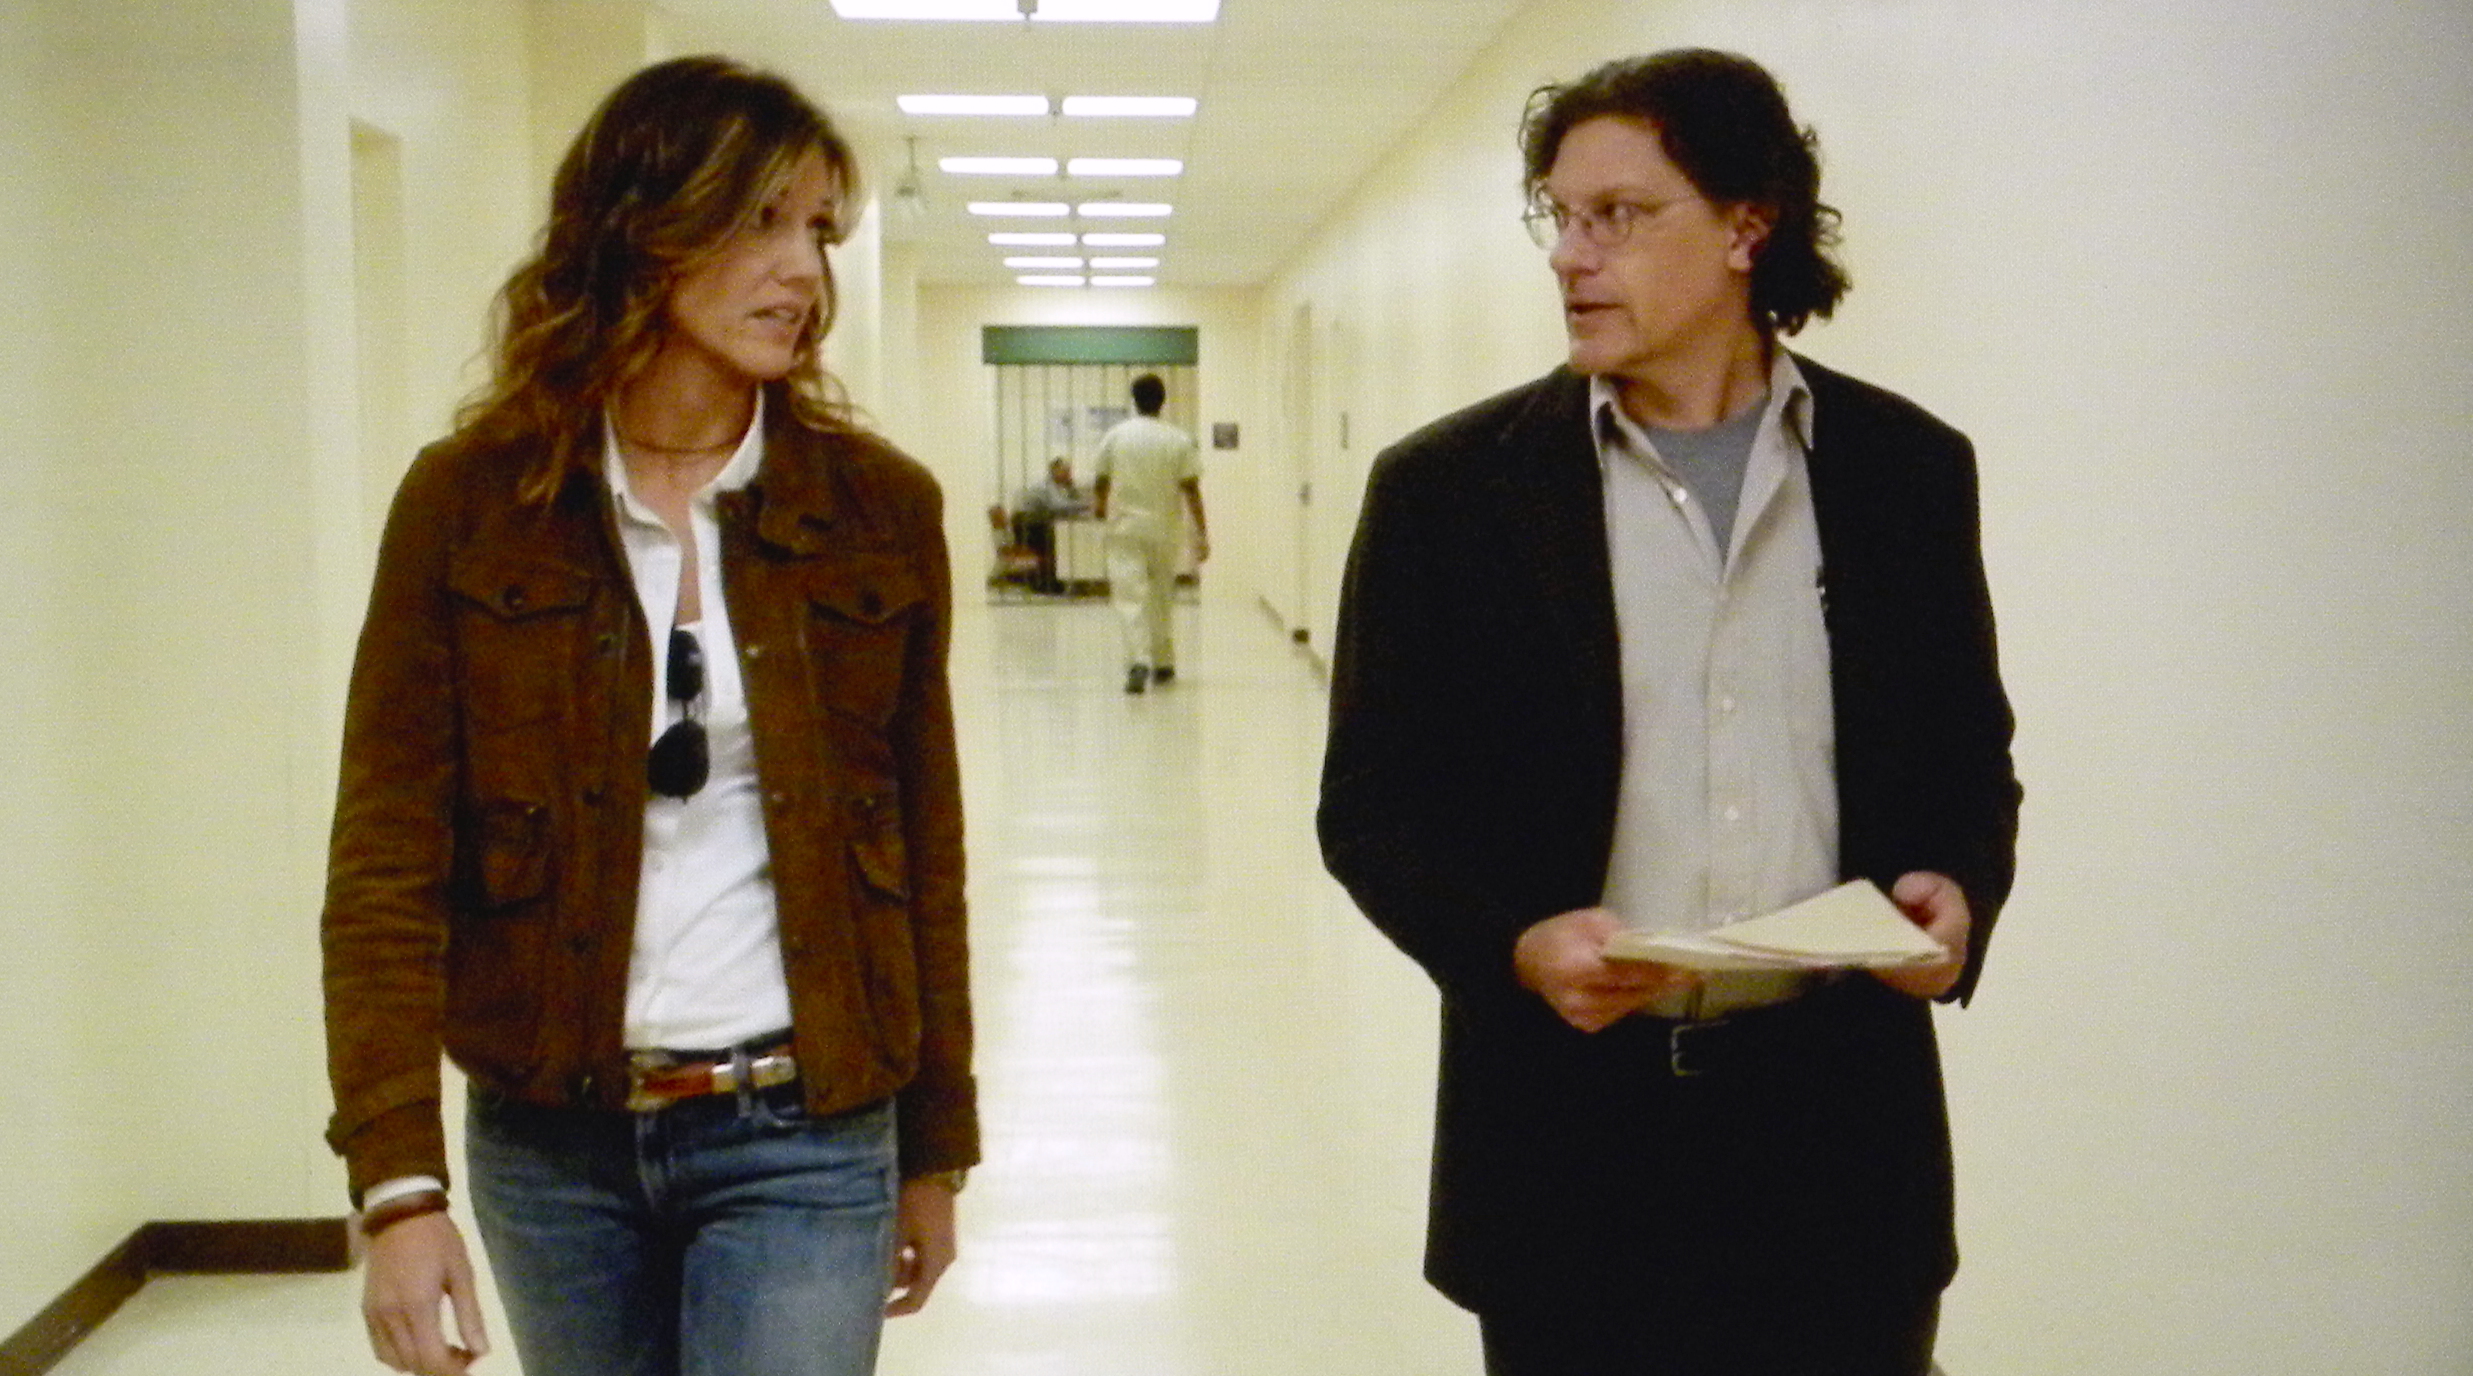 as Dr. Andrew James in KILLER WOMEN, with Tricia Helfer